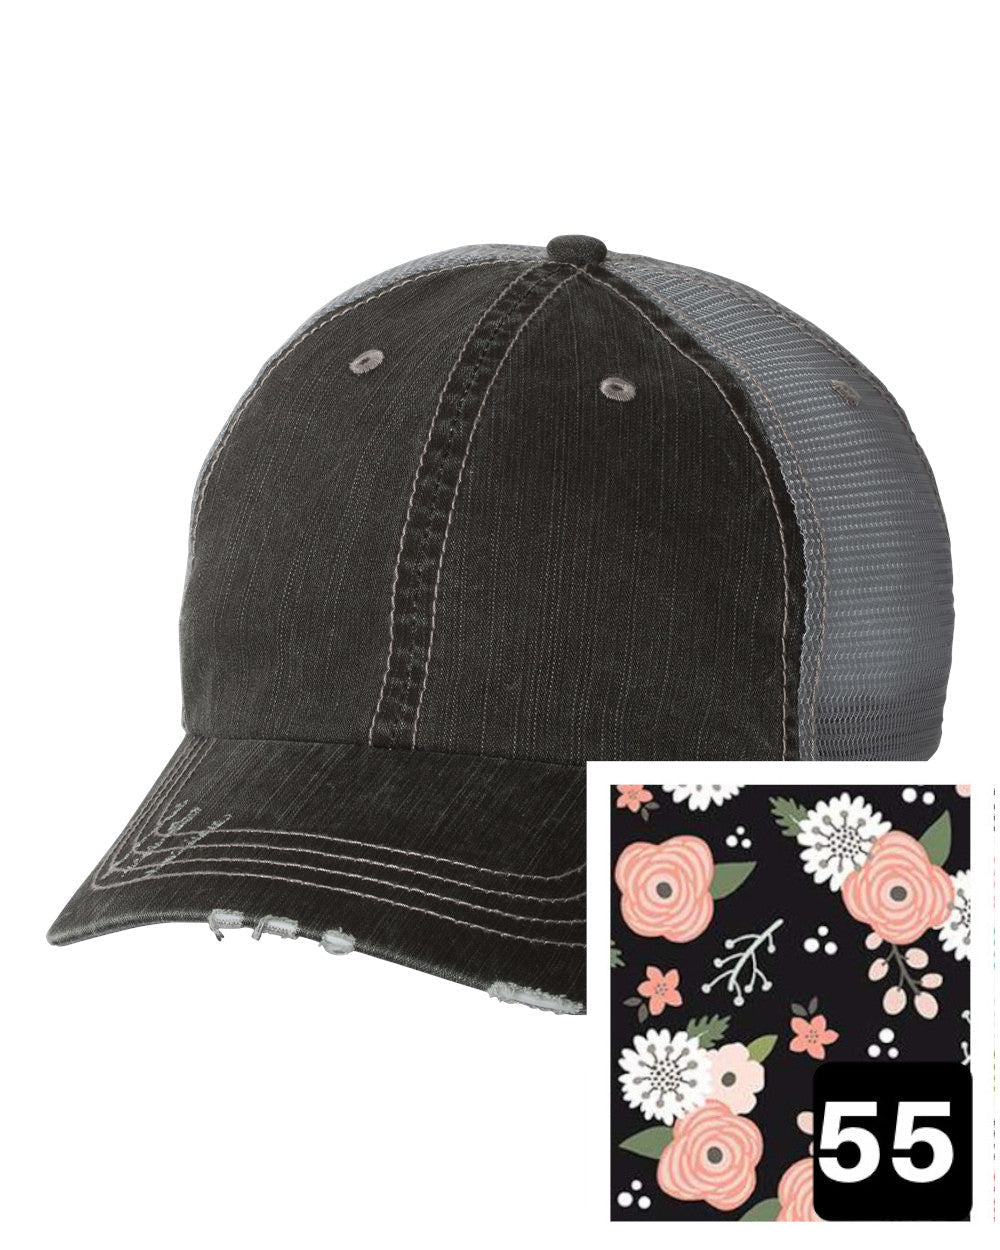 gray distressed trucker hat with petite floral on navy fabric state of Maryland